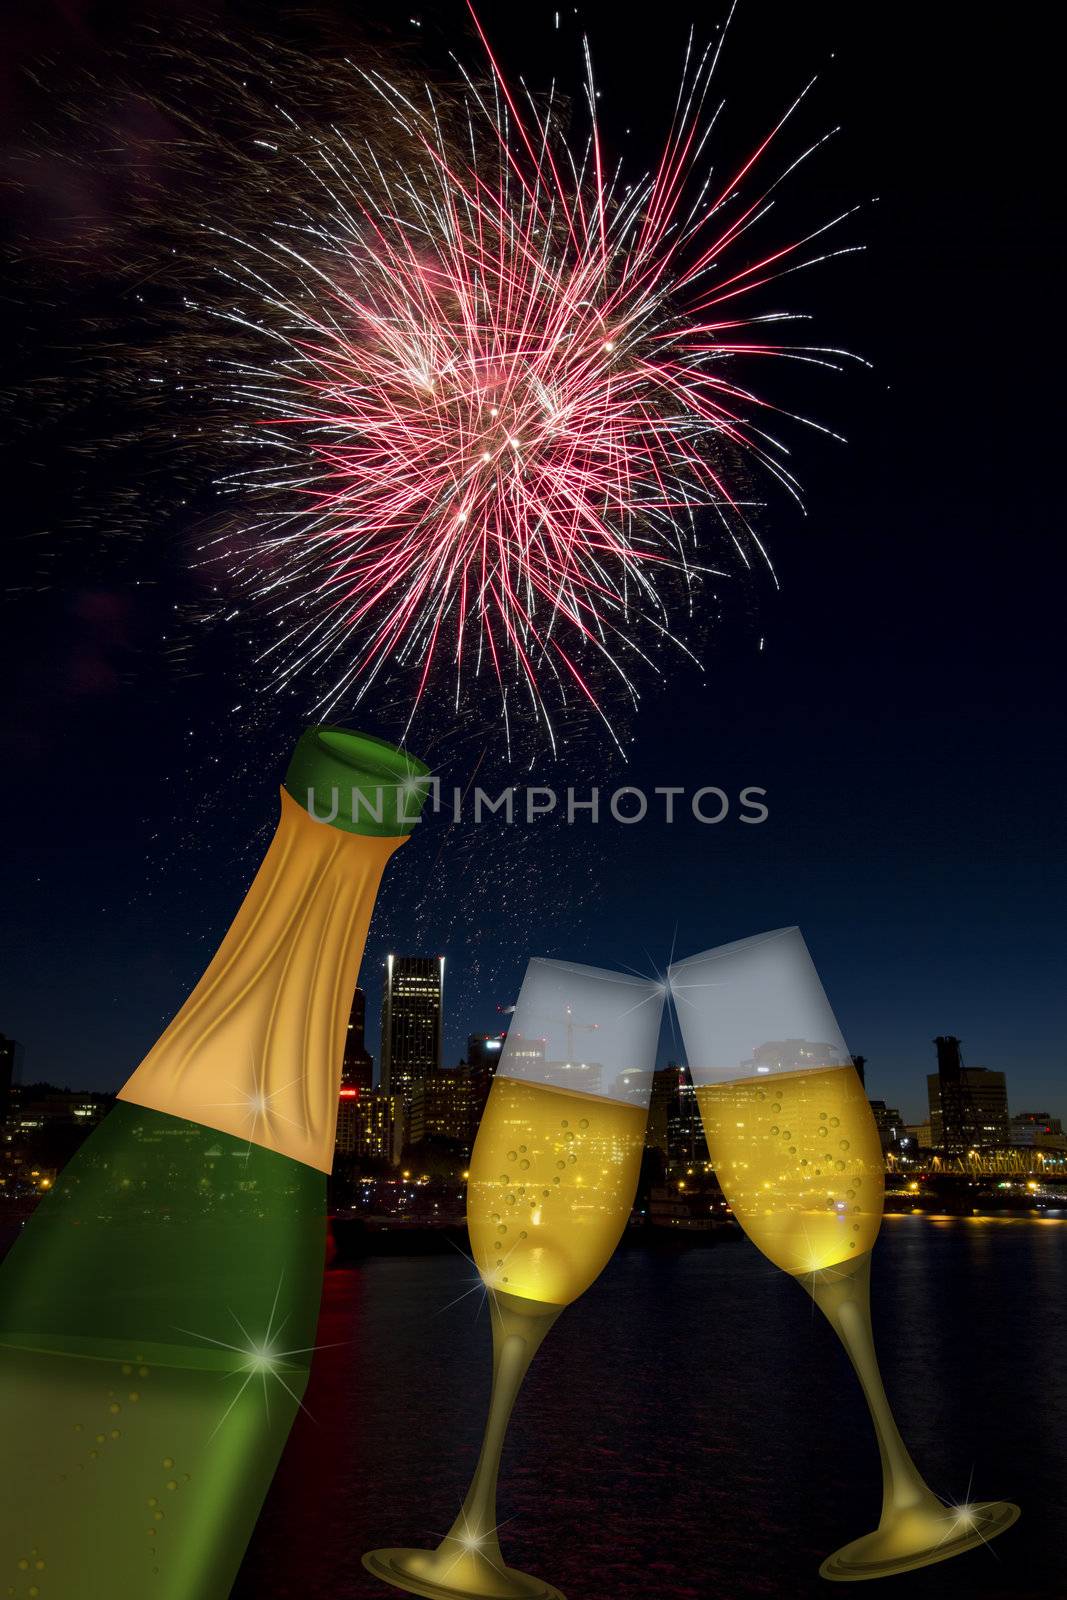 Champagne Toast Bottle and Glass Flutes with Portland Oregon City Skyline and Fireworks Illustration